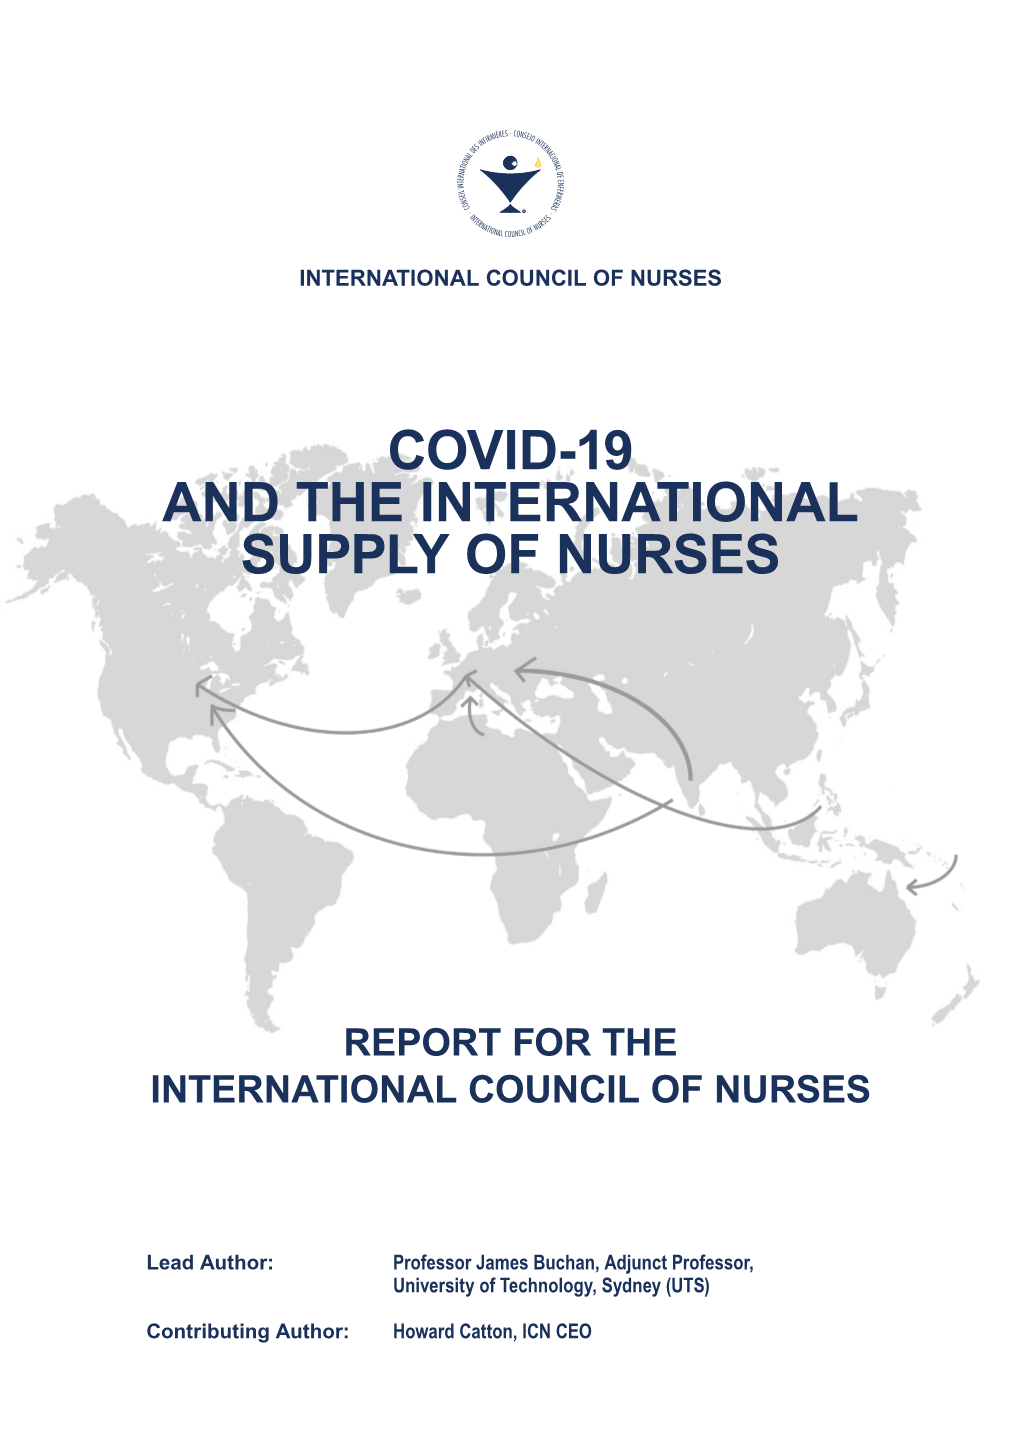 Covid-19 and the International Supply of Nurses